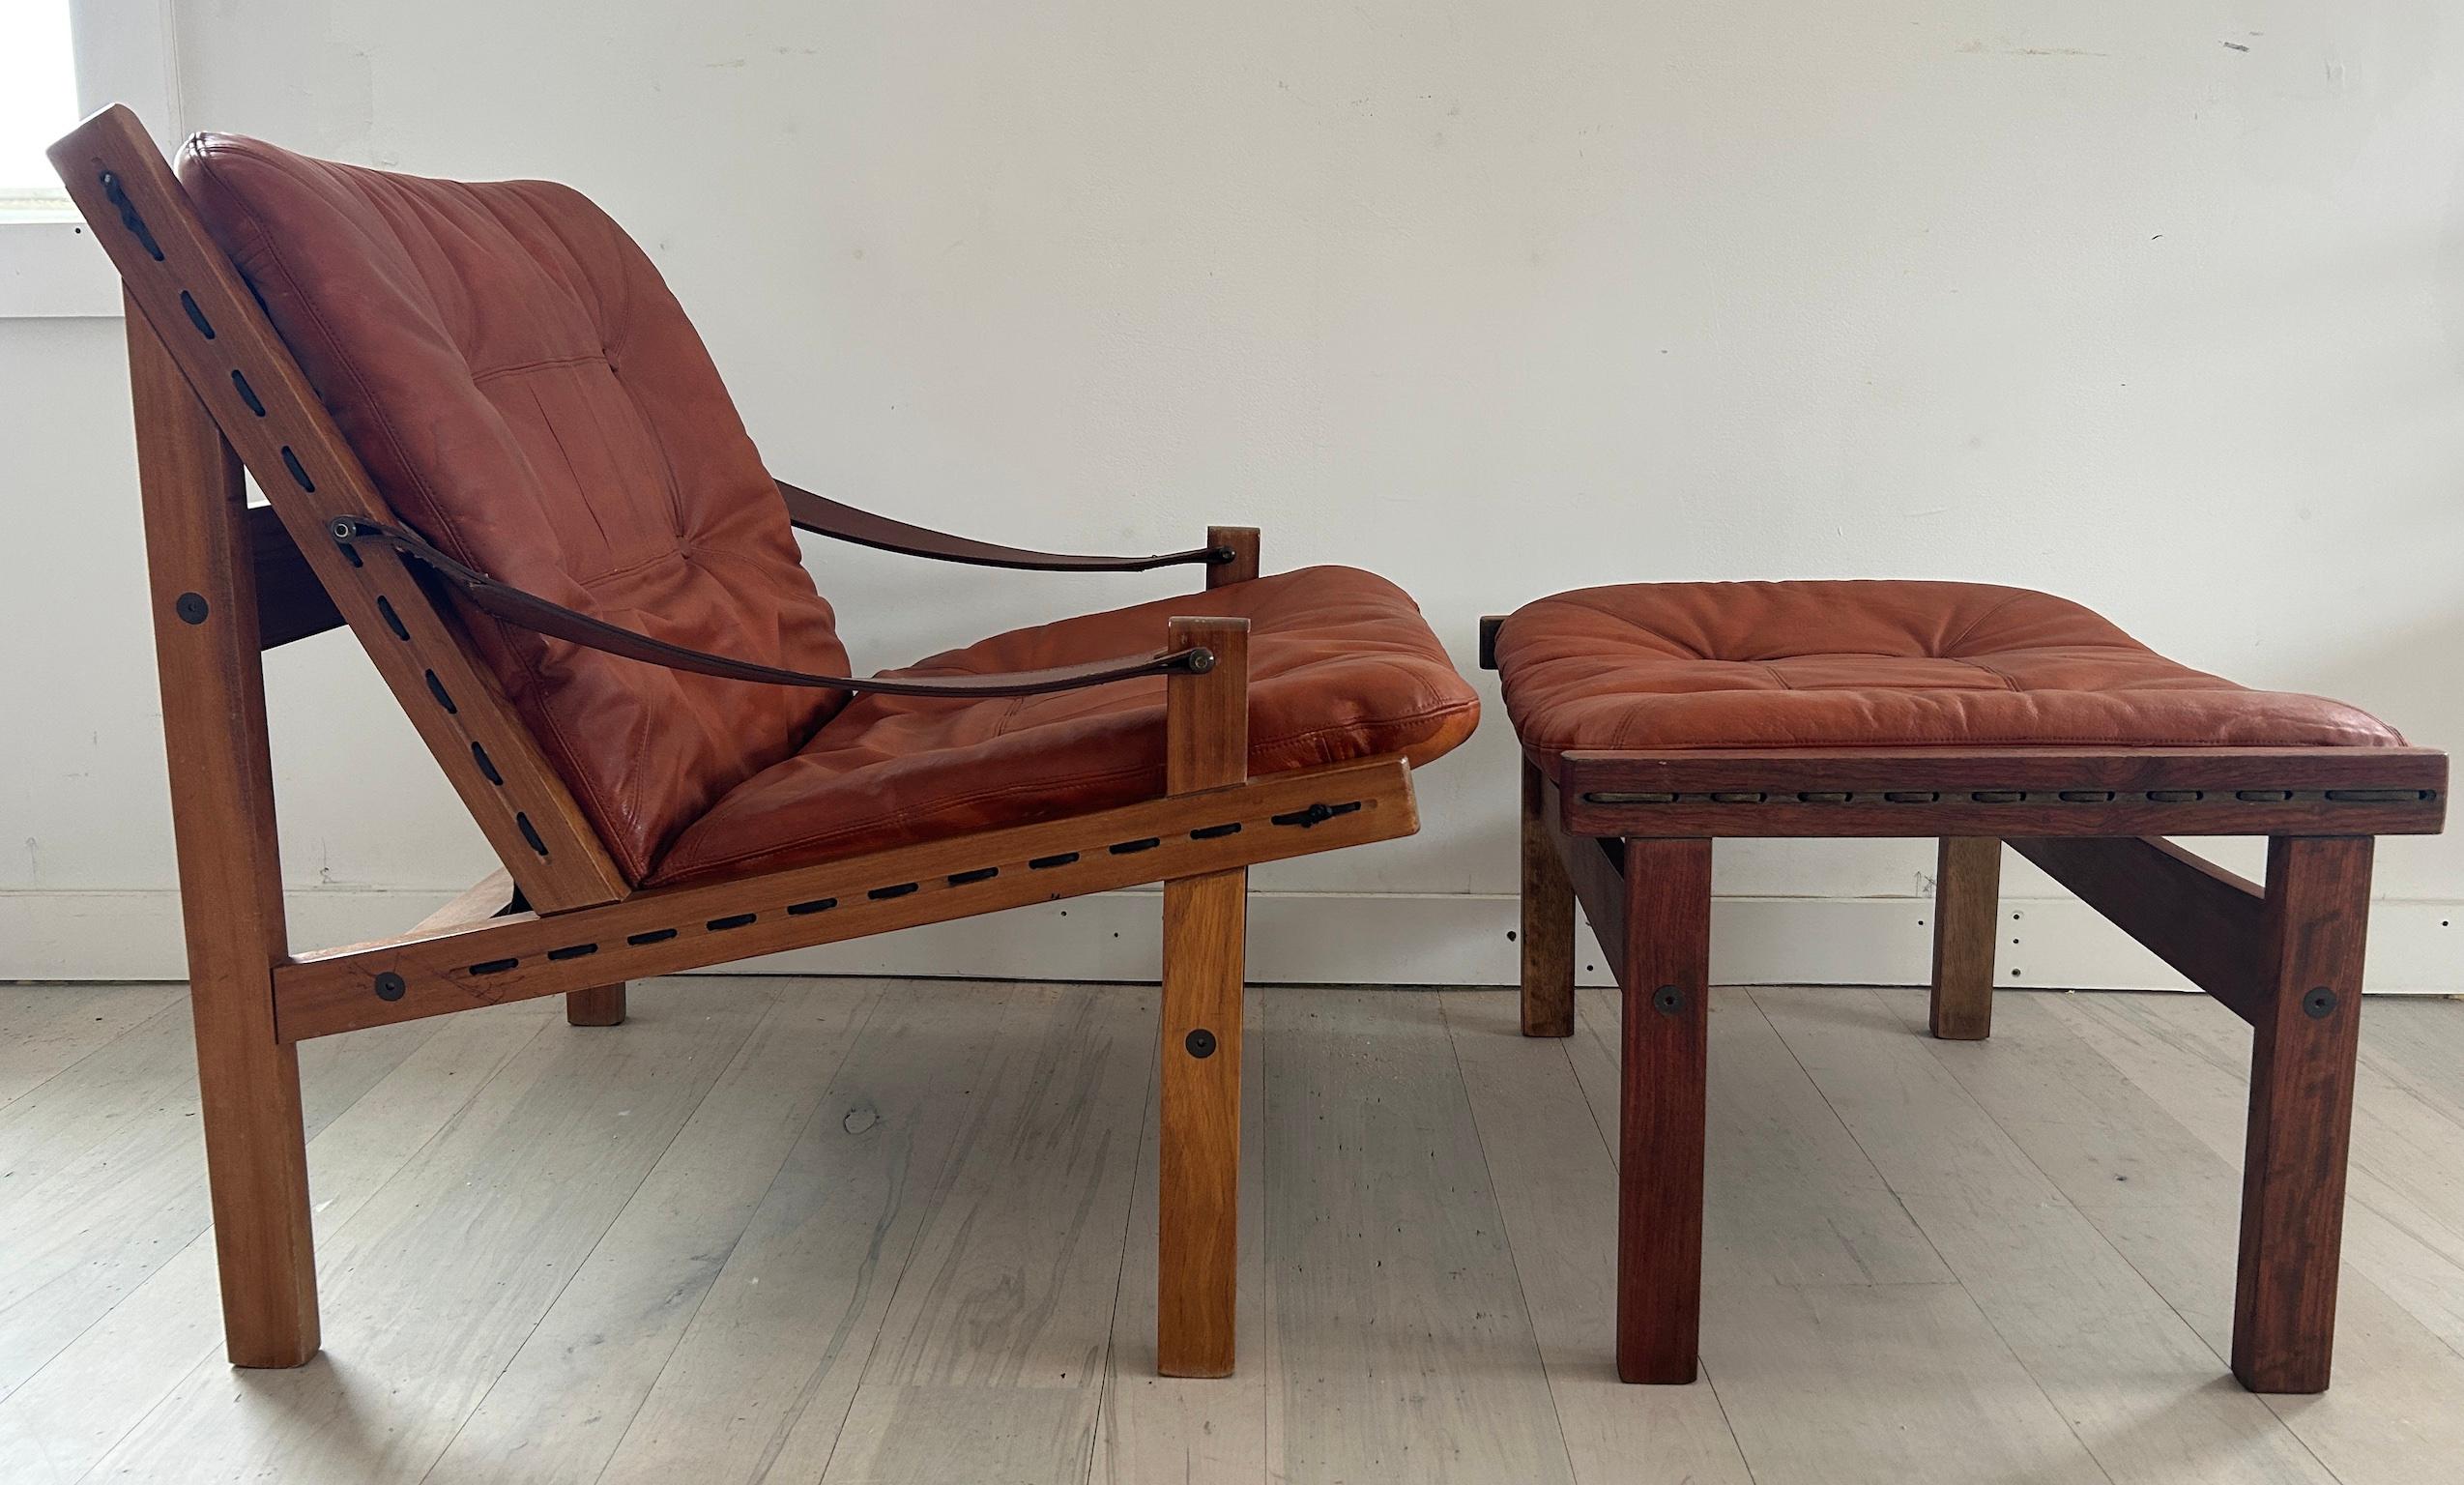 Burnt orange leather “Hunter” Safari low lounge chair with ottoman by Torbjørn Afdal for Bruksbo circa 1960. Solid wood frame with strung brown canvas back. Tan belt leather arms with brass hardware. Burnt orange leather seat and ottoman cushions.